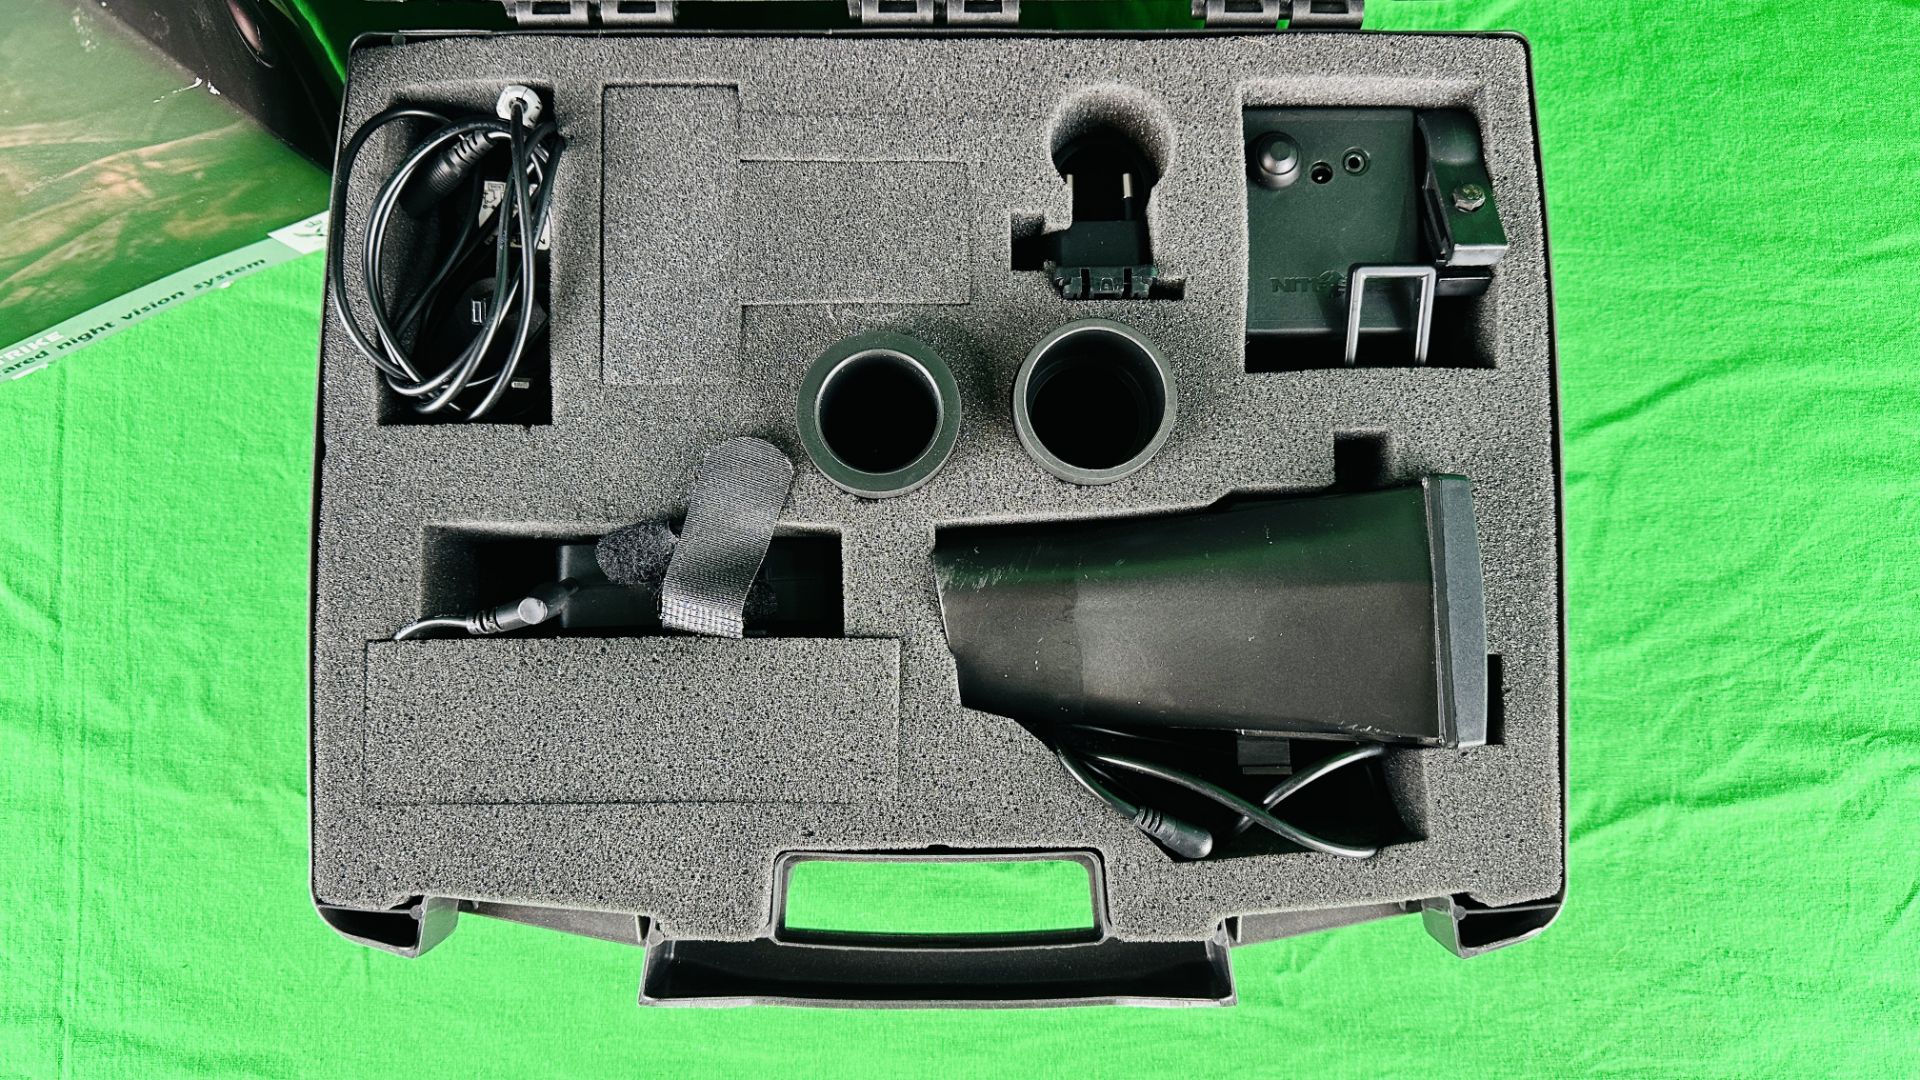 WOLF MEDIUM RANGE STRIKE SCOPE MOUNTED INFRARED NIGHT VISION SYSTEM IN CARRY CASE. - Image 2 of 6